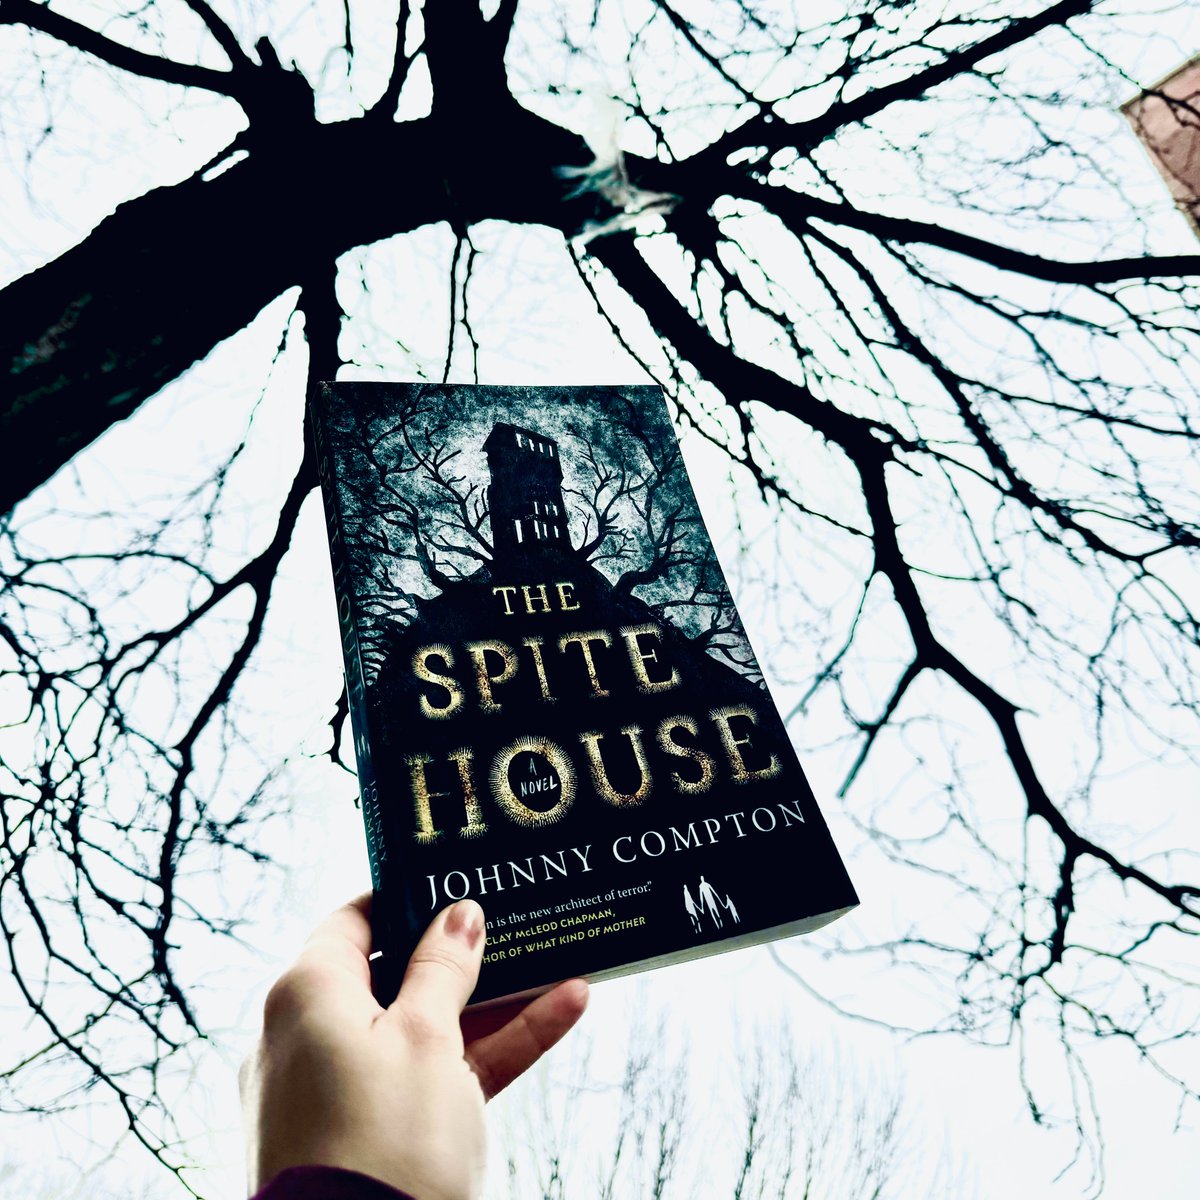 .@ComptonWrites's Gothic horror novel THE SPITE HOUSE is out in paperback TODAY! This terrifying tale of grief, death and the depths of a father's love is now available wherever books are sold🏚️ us.macmillan.com/books/97812508…